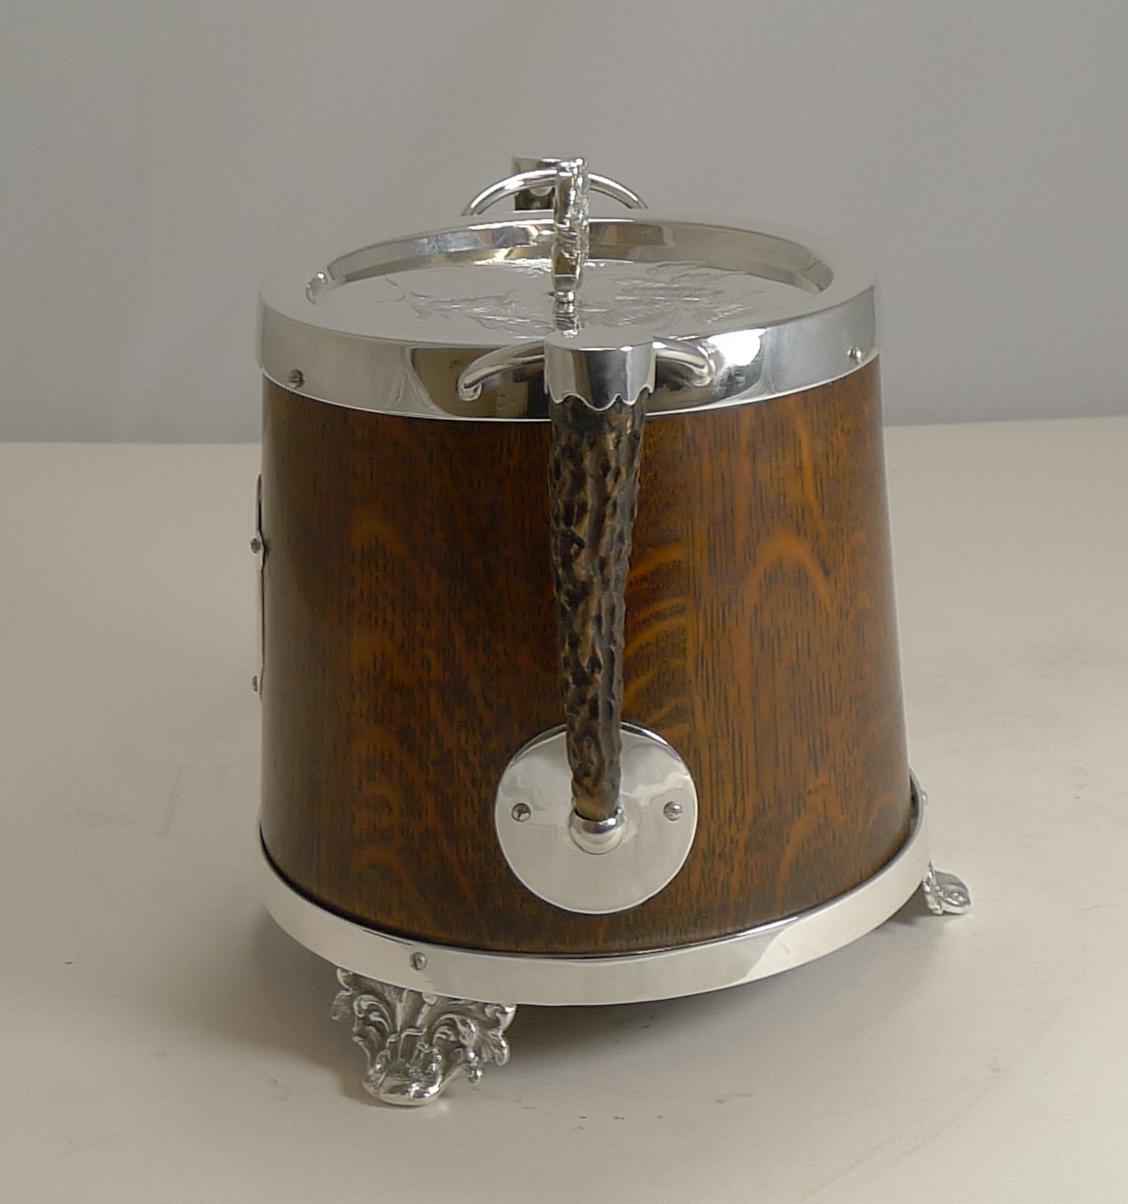 Early 20th Century Antique English Oak and Silver Plate Biscuit Box / Barrel circa 1900, Squirrel